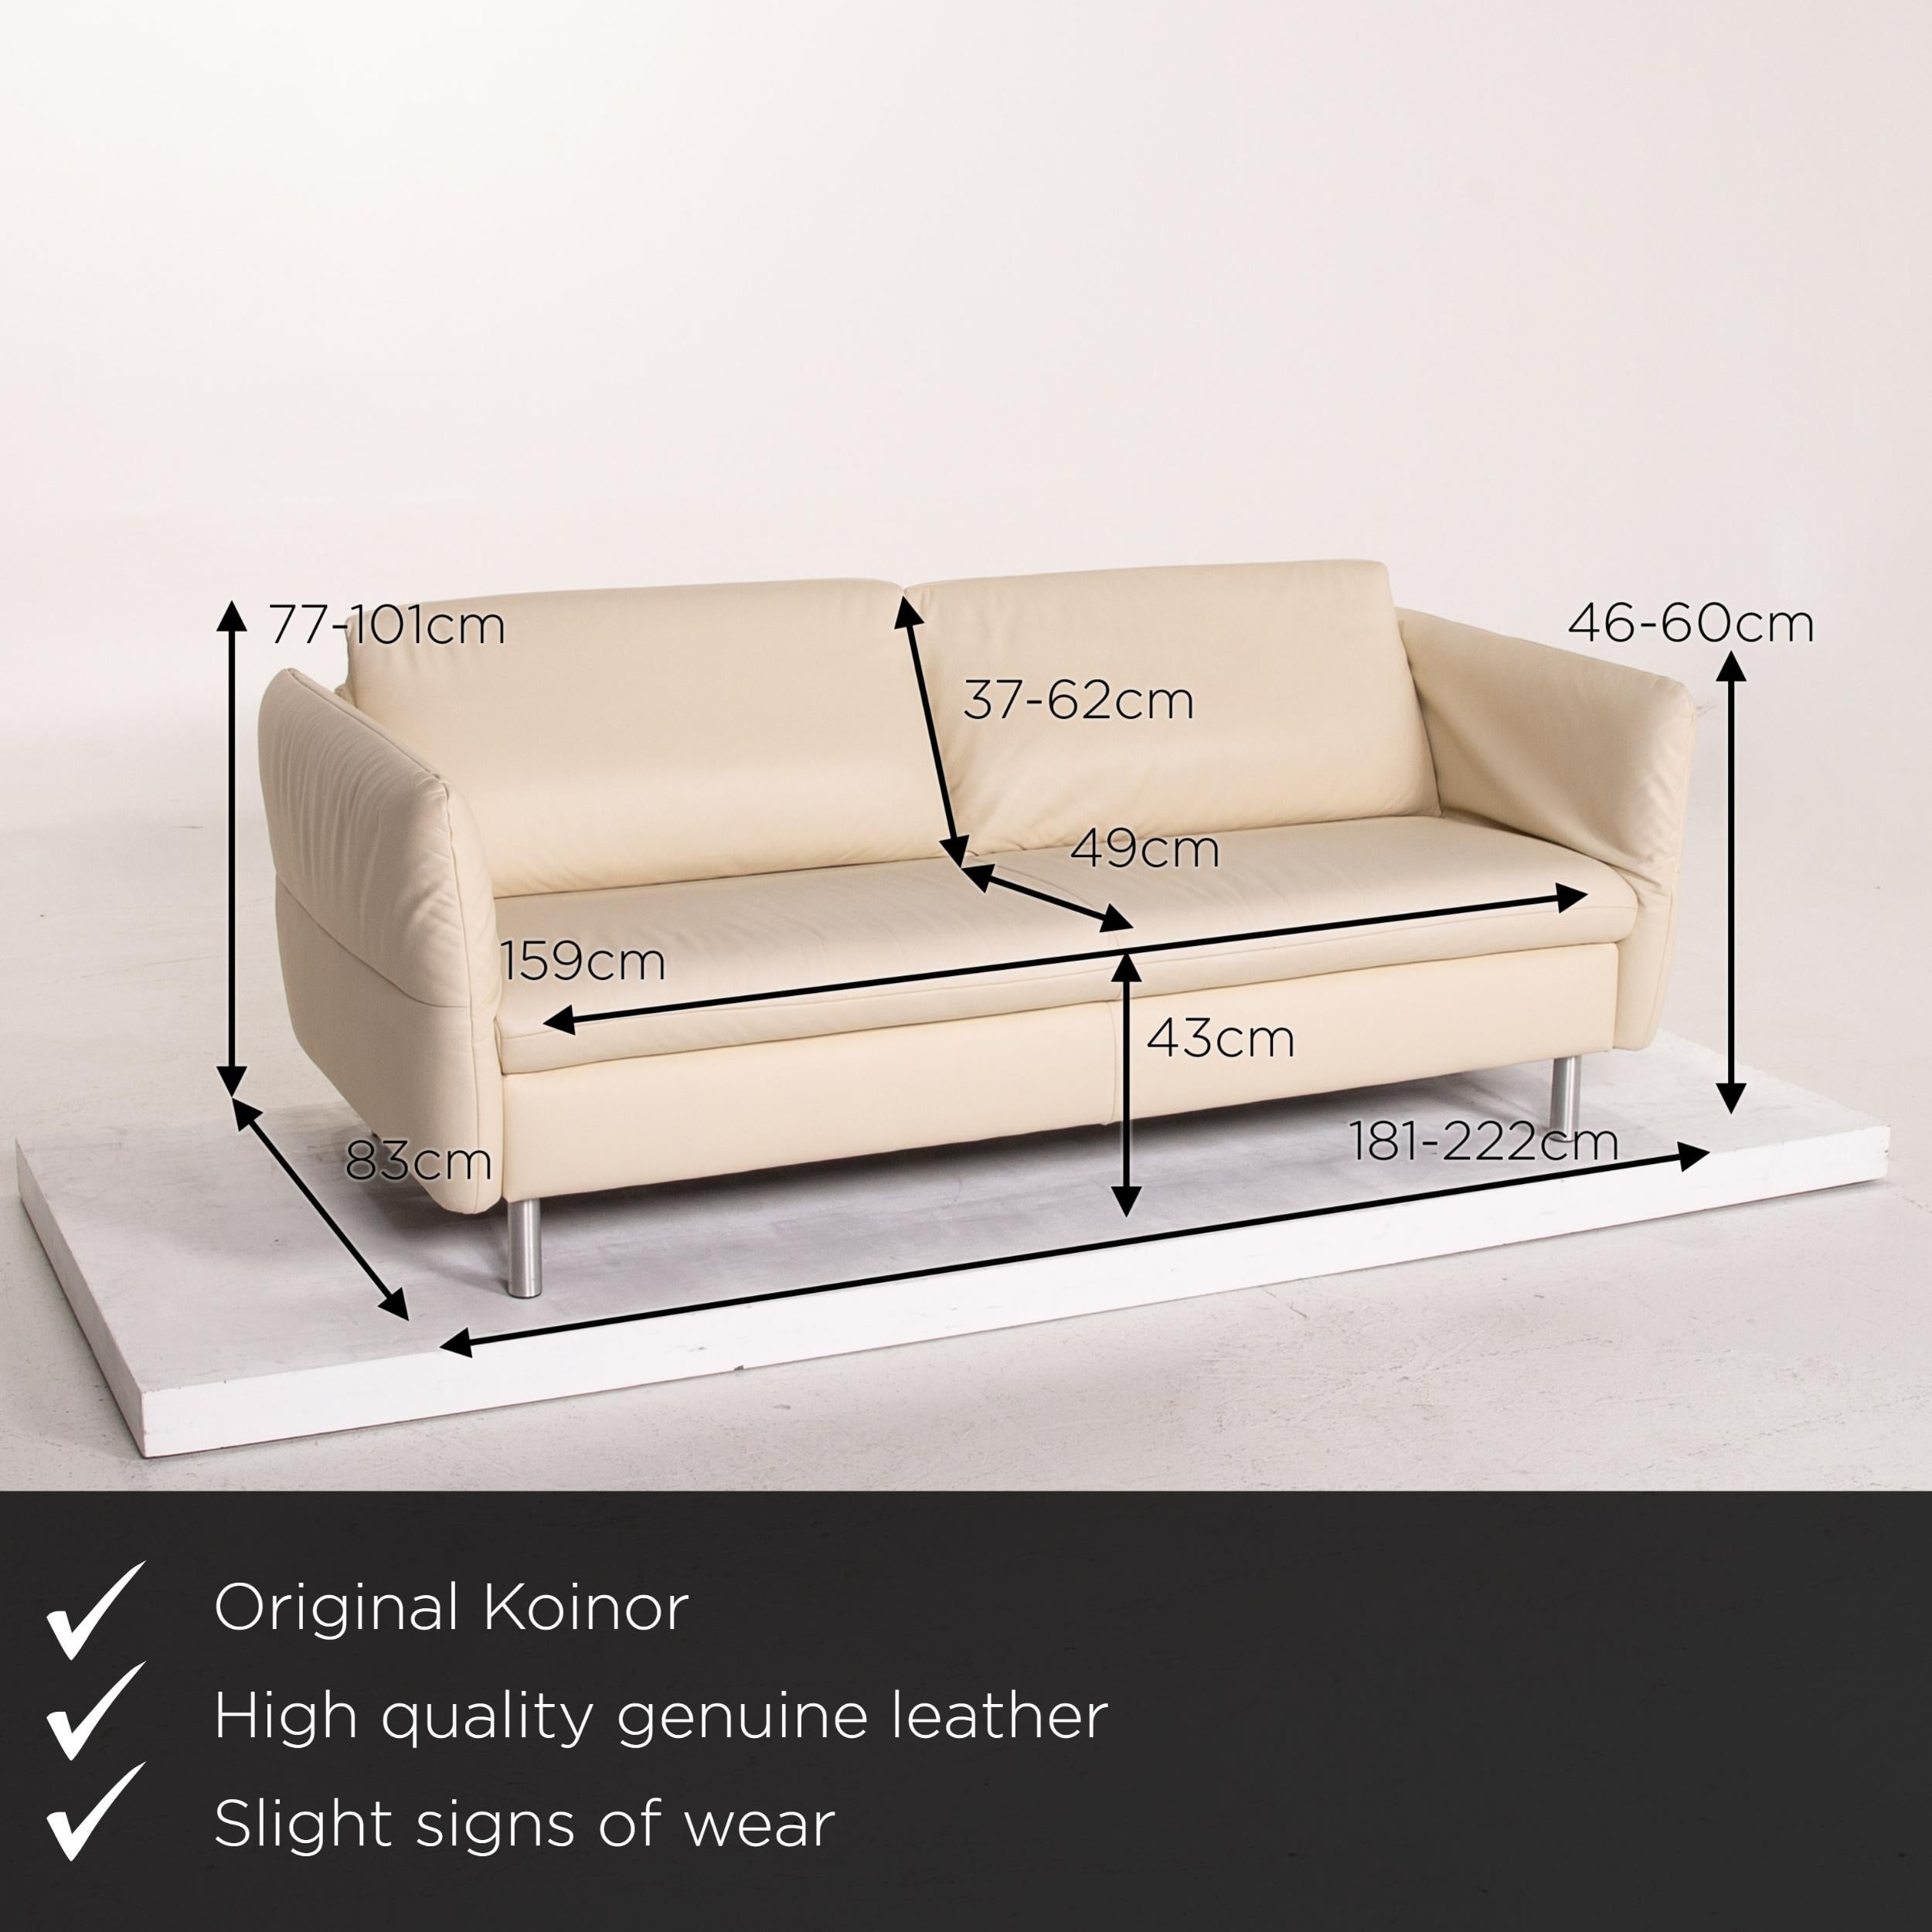 We present to you a Koinor Vittoria plumas azules, and plumas colores, set leather sofa cream two-seat couch.



 Product measurements in centimeters:
 

Depth 83
Width 181
Height 77
Seat height 43
Rest height 46
Seat depth 49
Seat